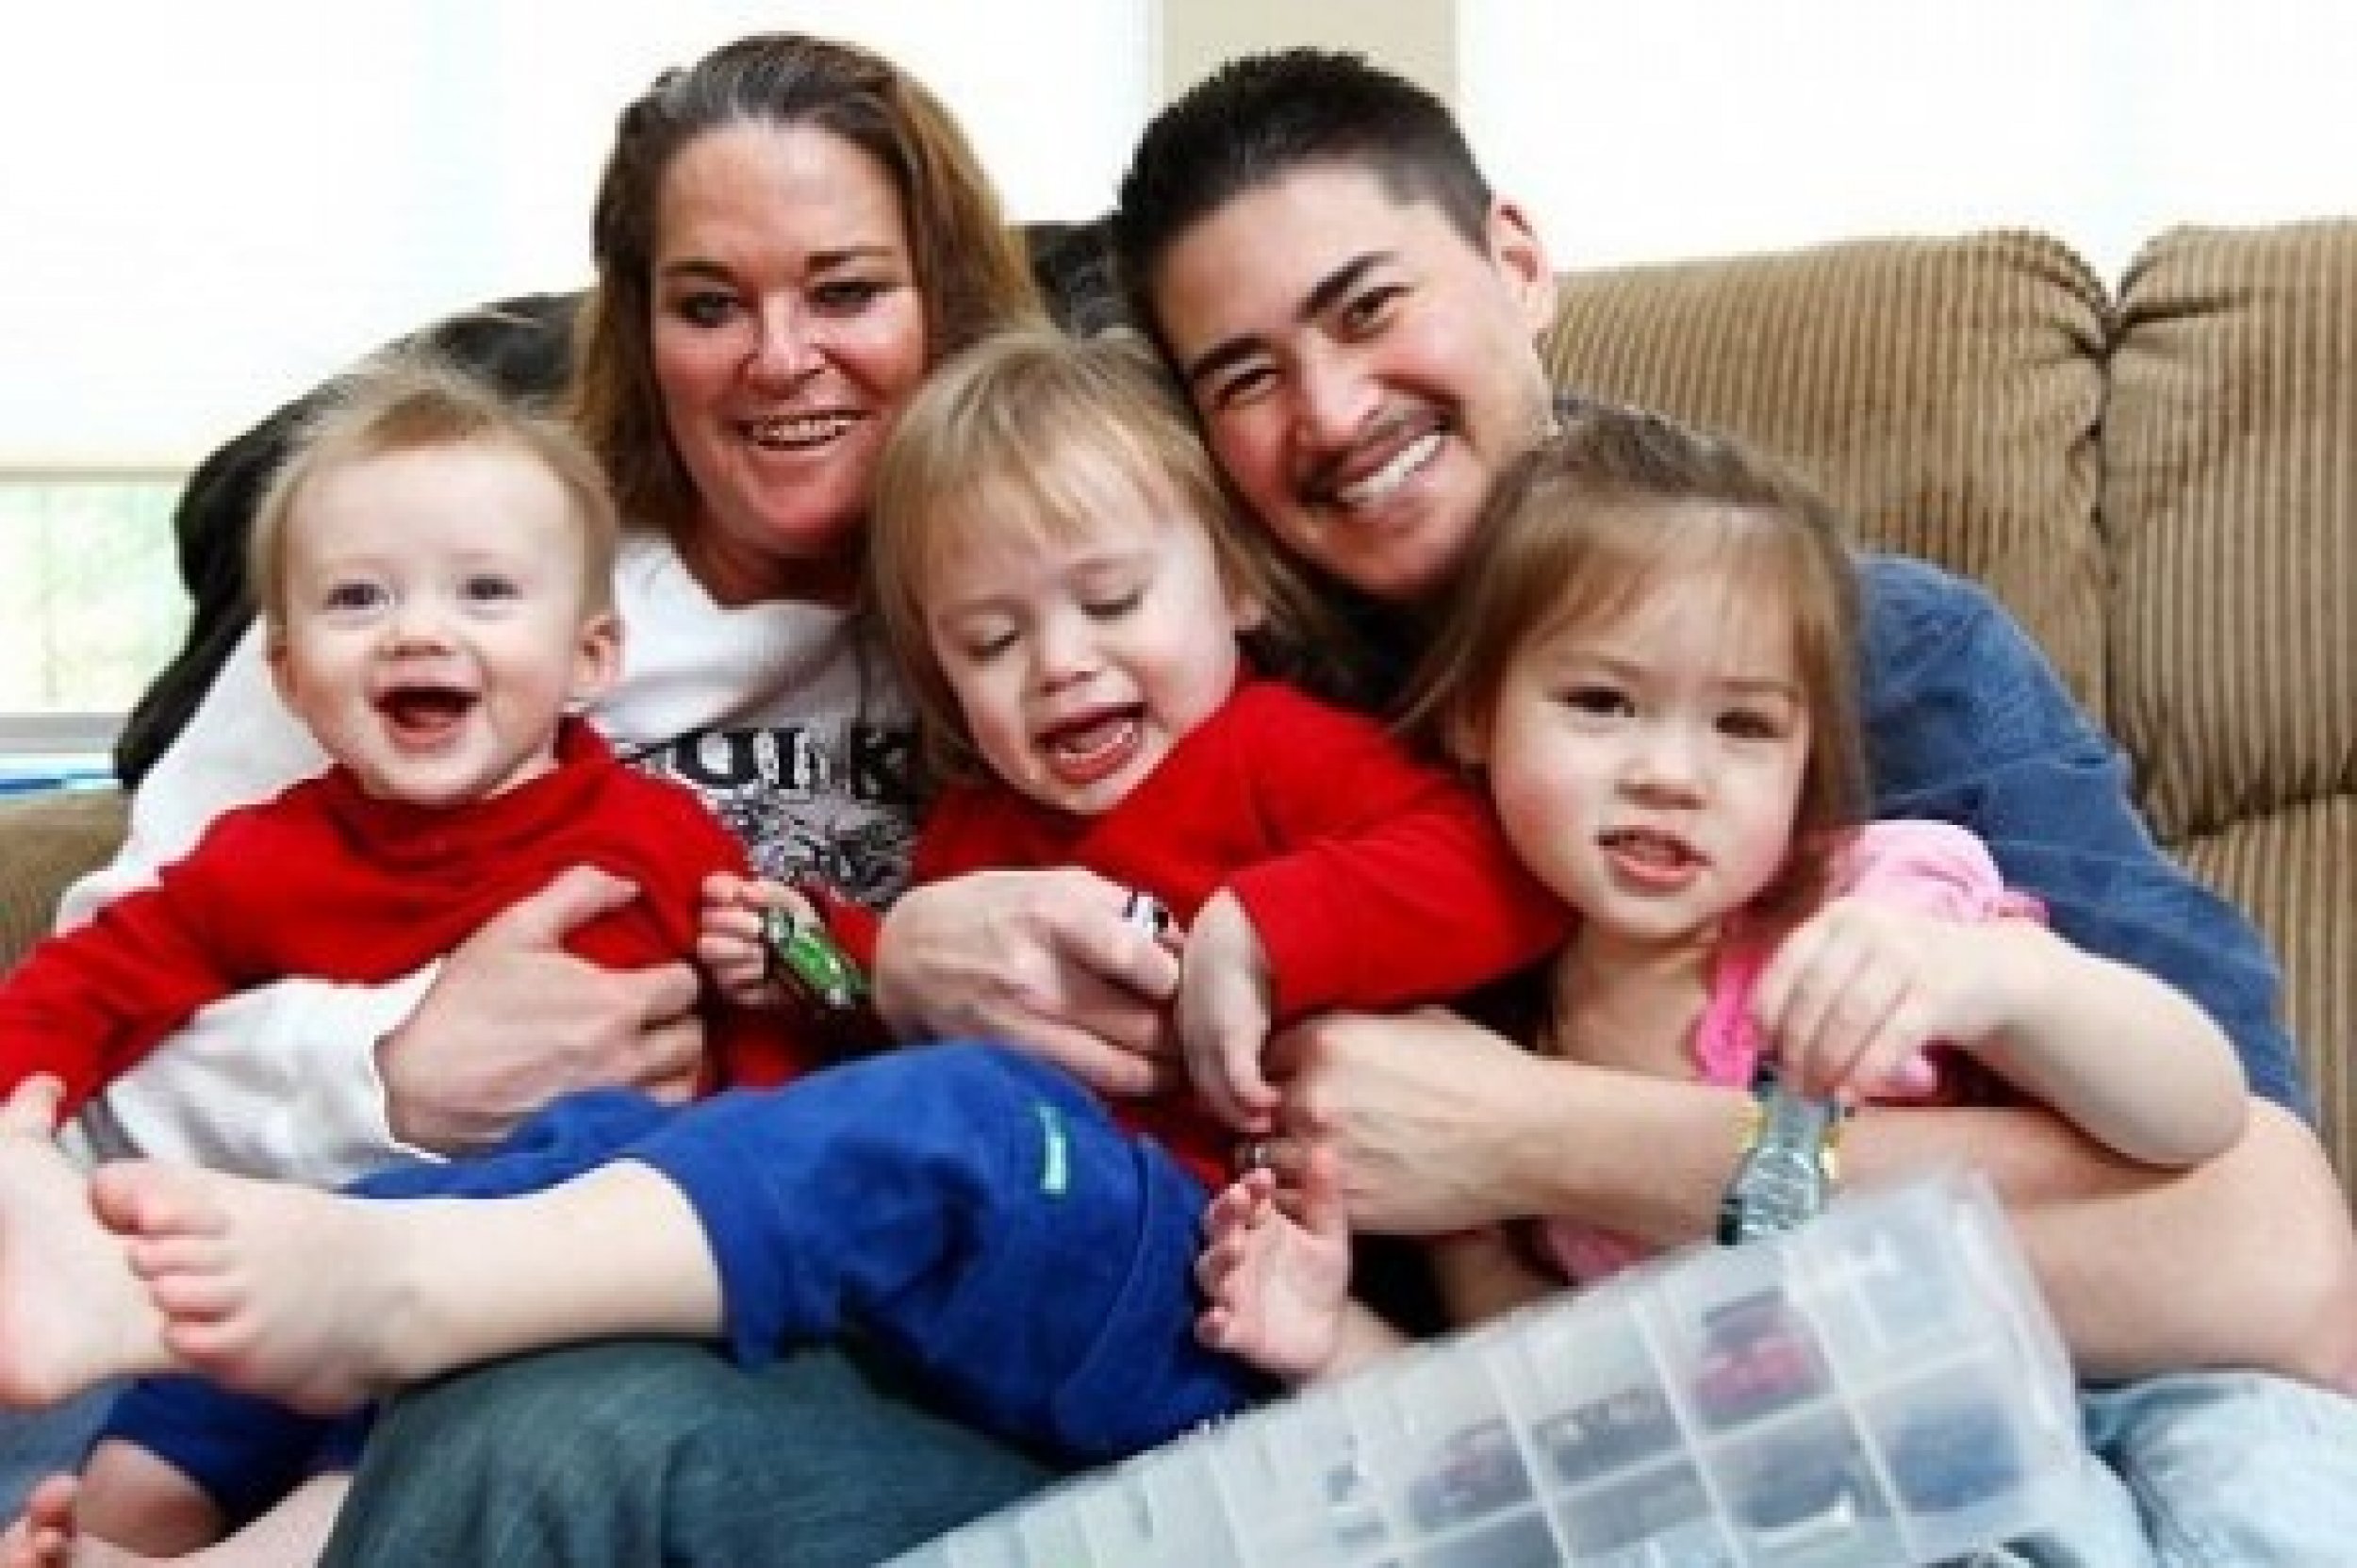 quotPregnant Manquot Thomas Beatie Splits From Wife Nancy After 9 Years